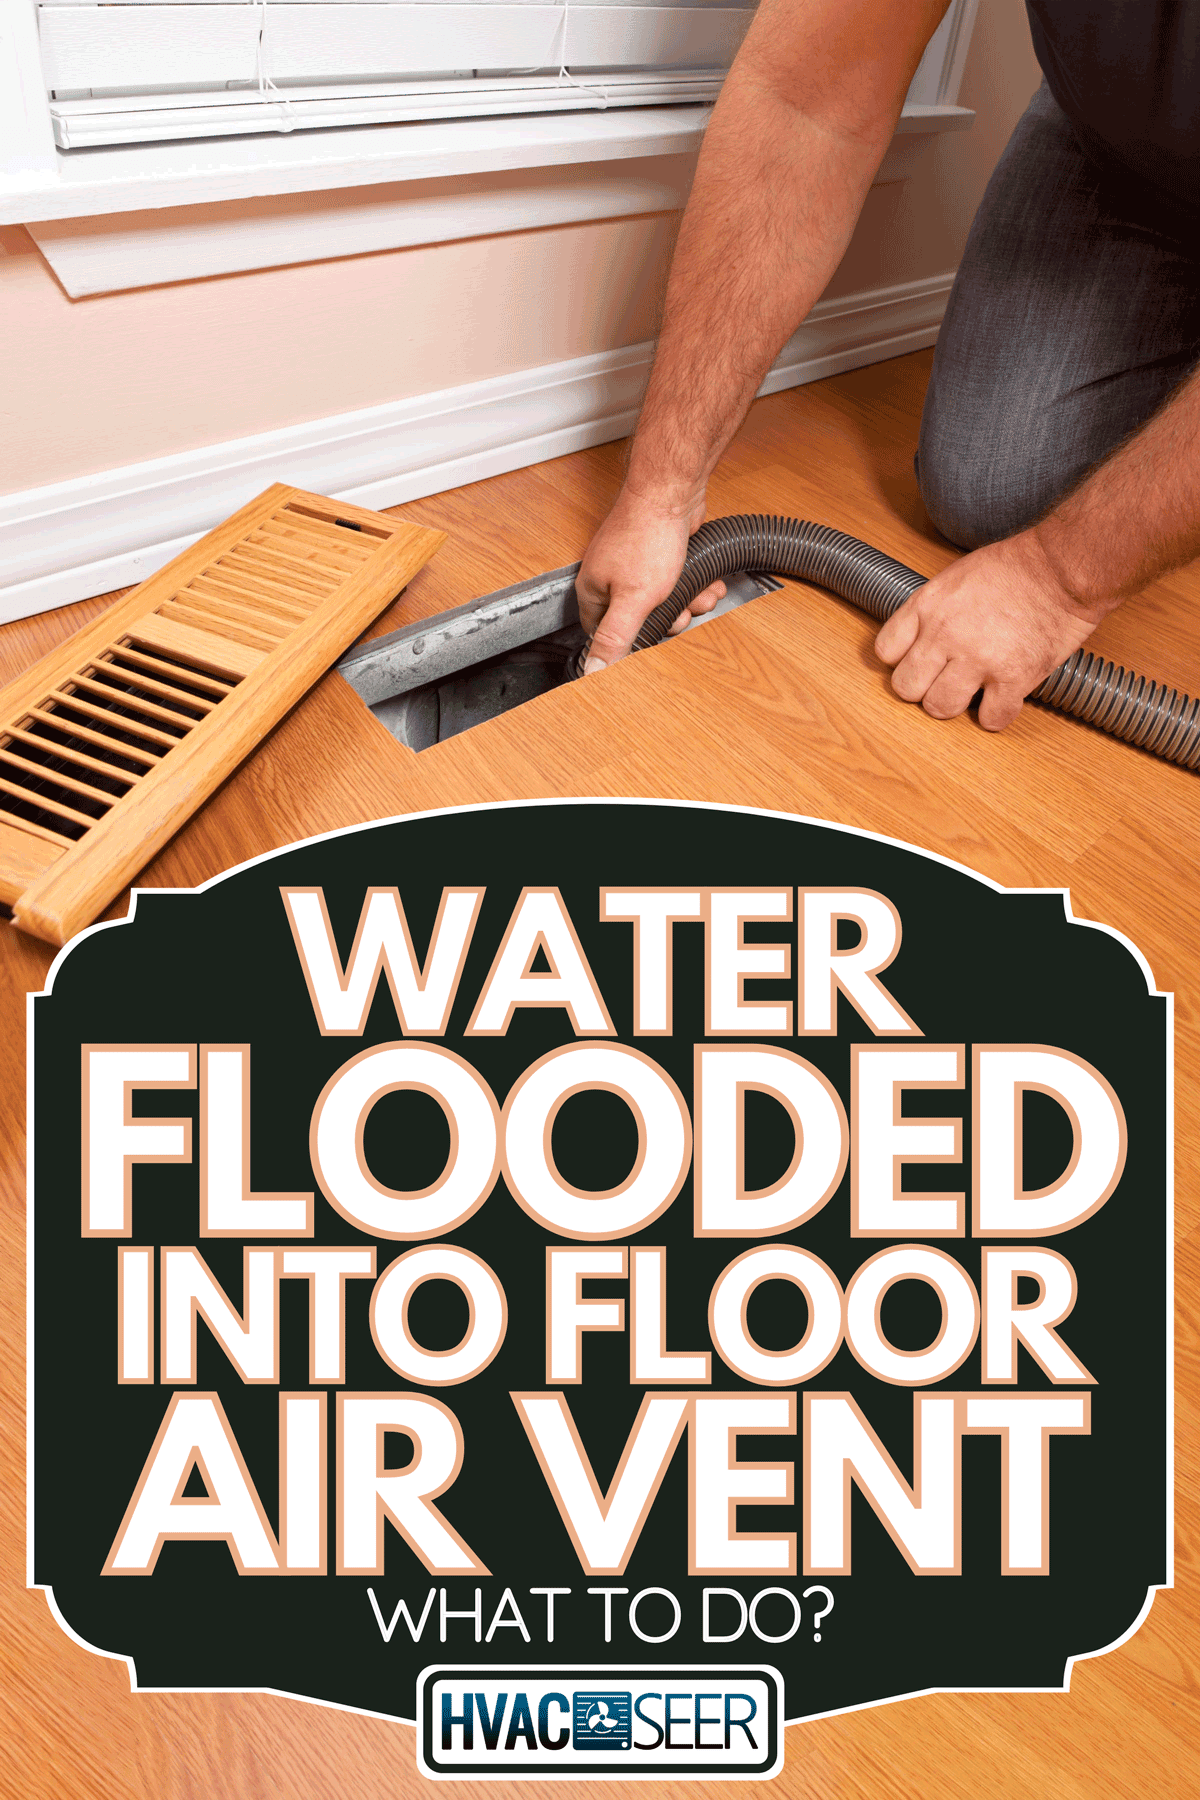 Man remove water inside the floor air vent, Water Flooded Into Floor Air Vent - What To Do?